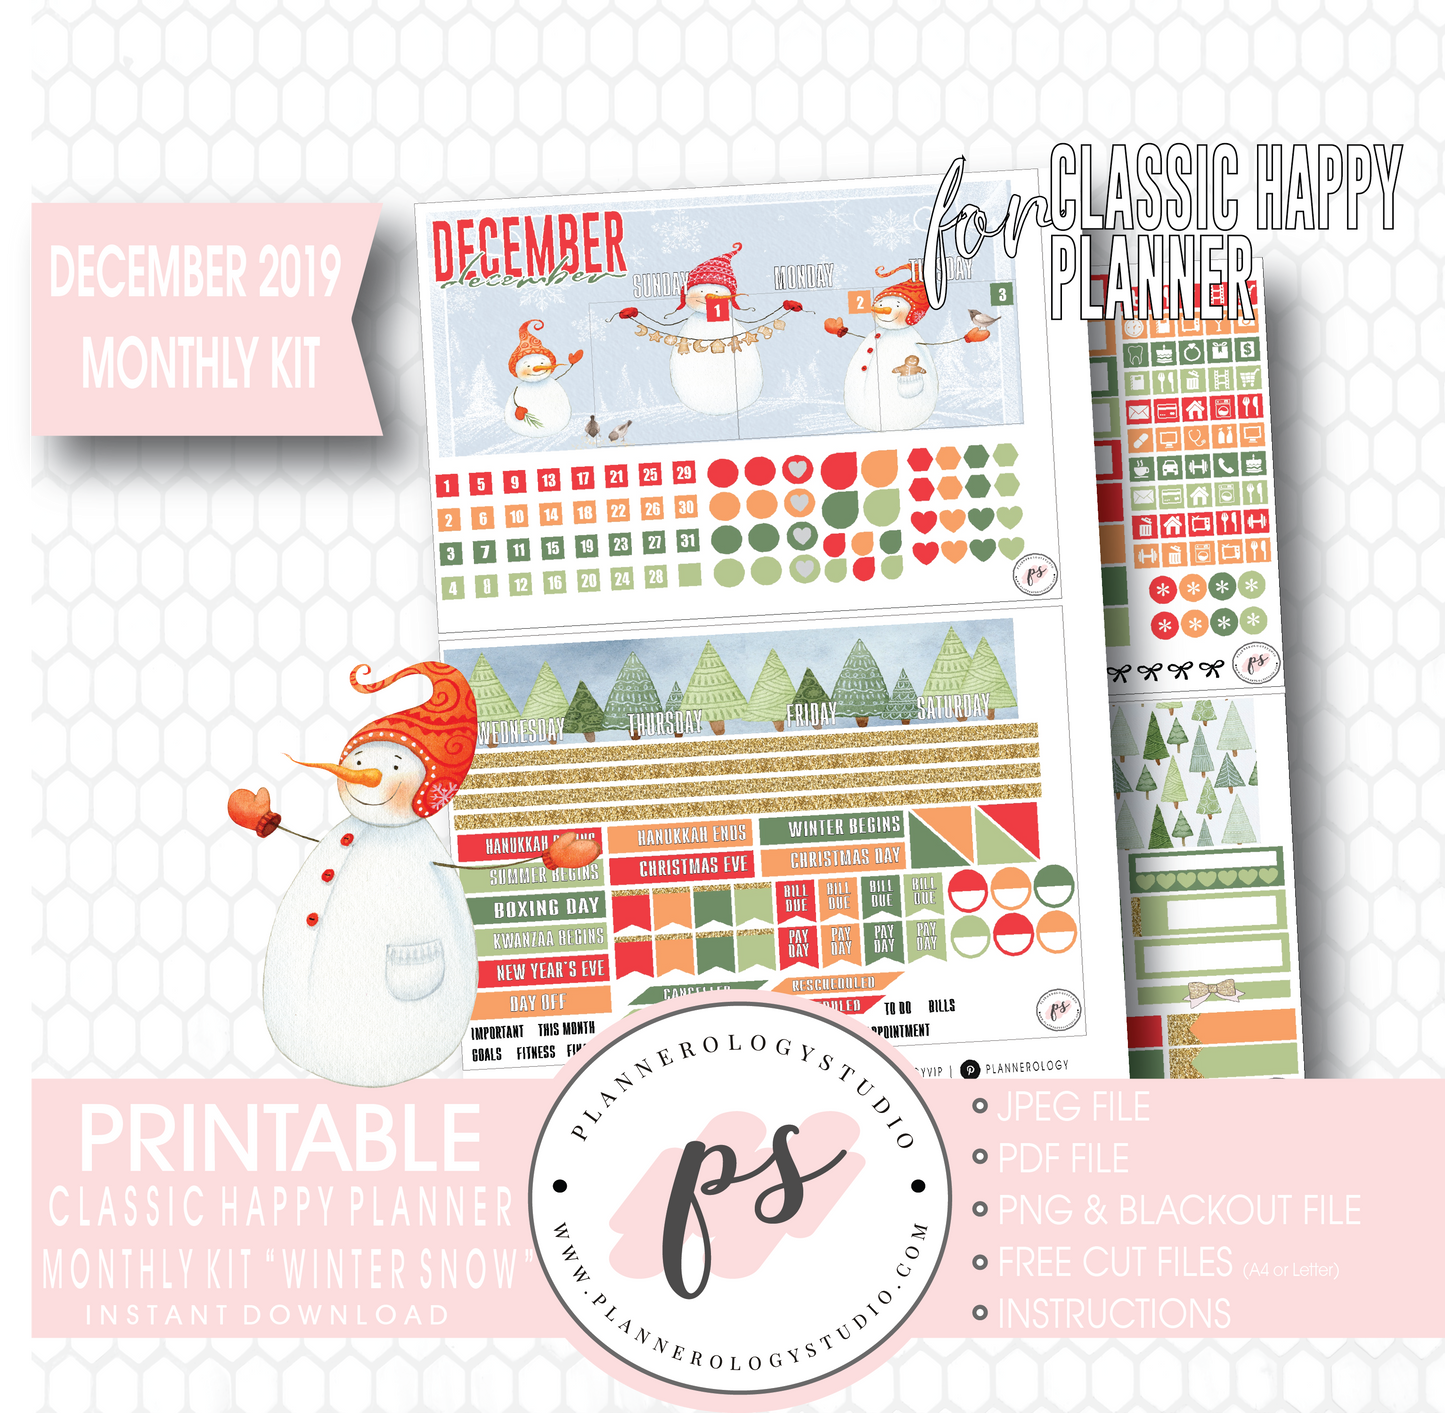 Winter Snow December 2019 Monthly View Kit Digital Printable Planner Stickers (for use with Classic Happy Planner) - Plannerologystudio